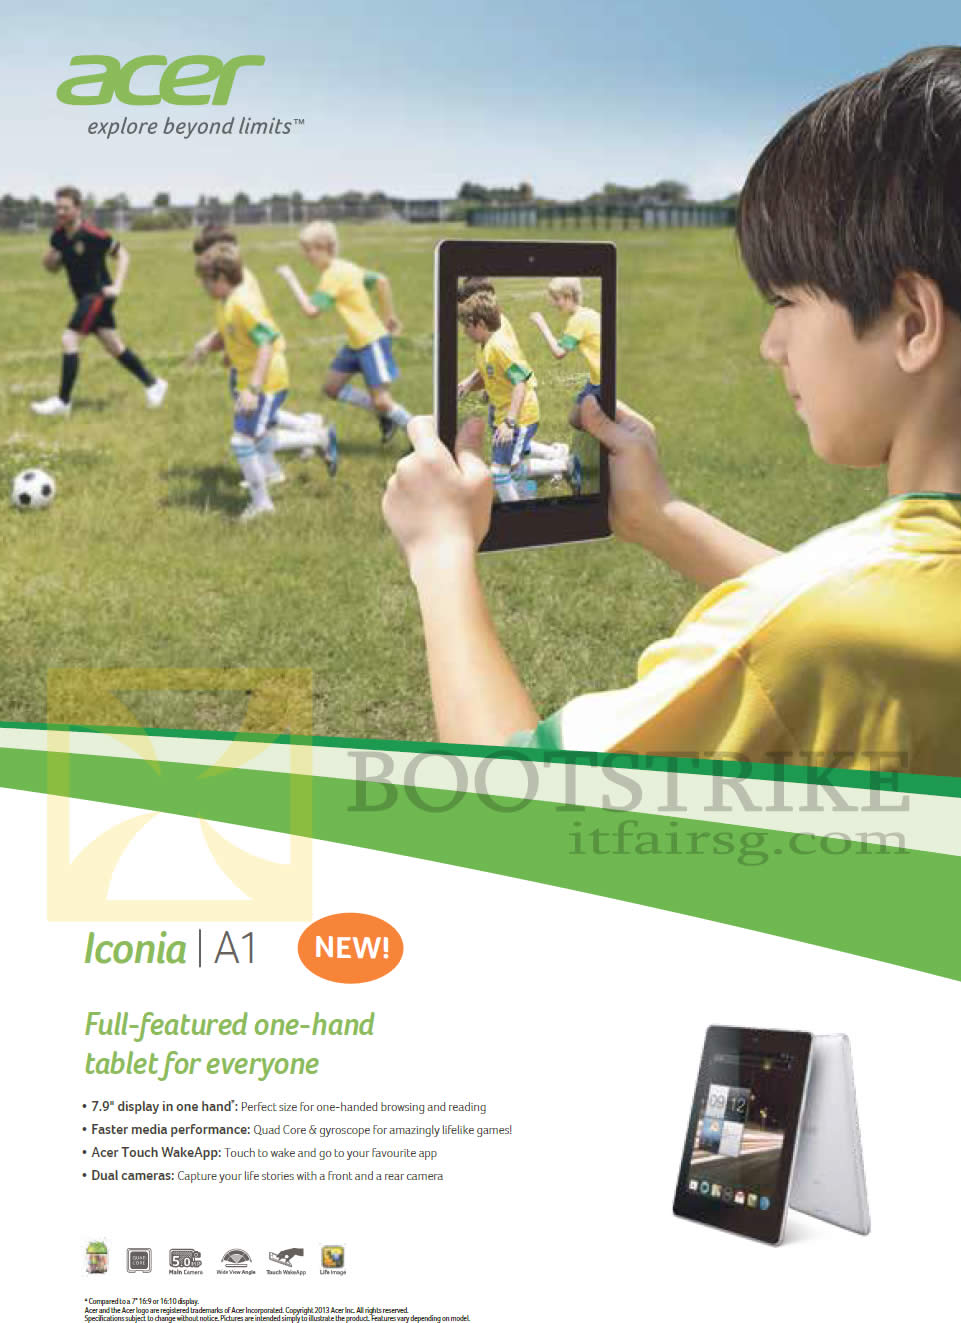 PC SHOW 2013 price list image brochure of Acer Tablet Iconia A1